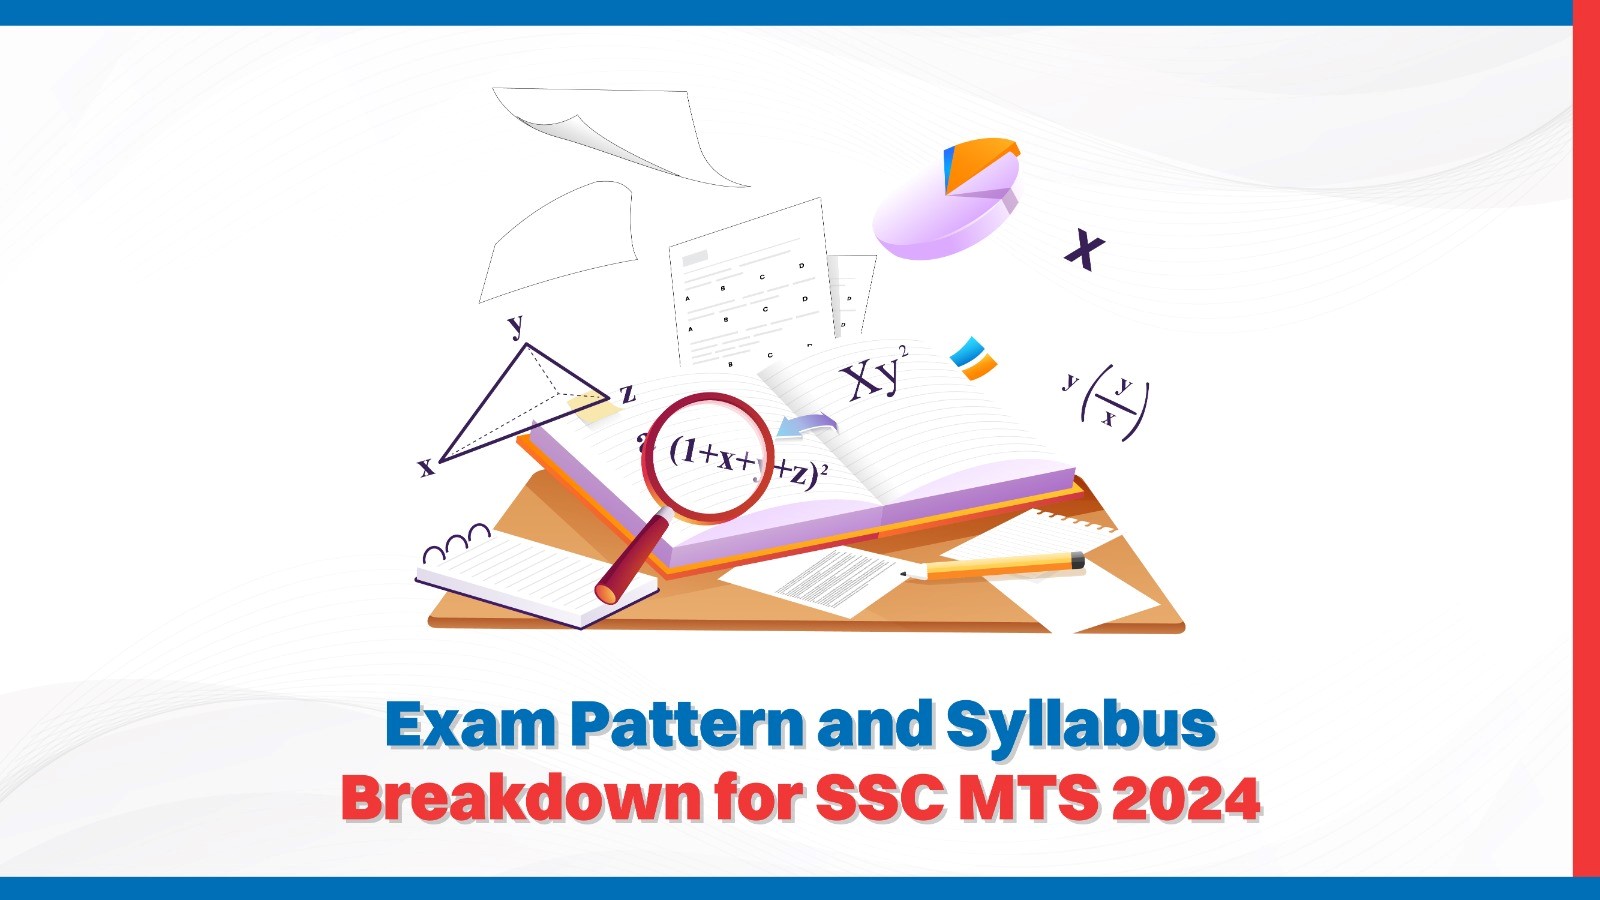 Exam Pattern and Syllabus Breakdown for SSC MTS 2024